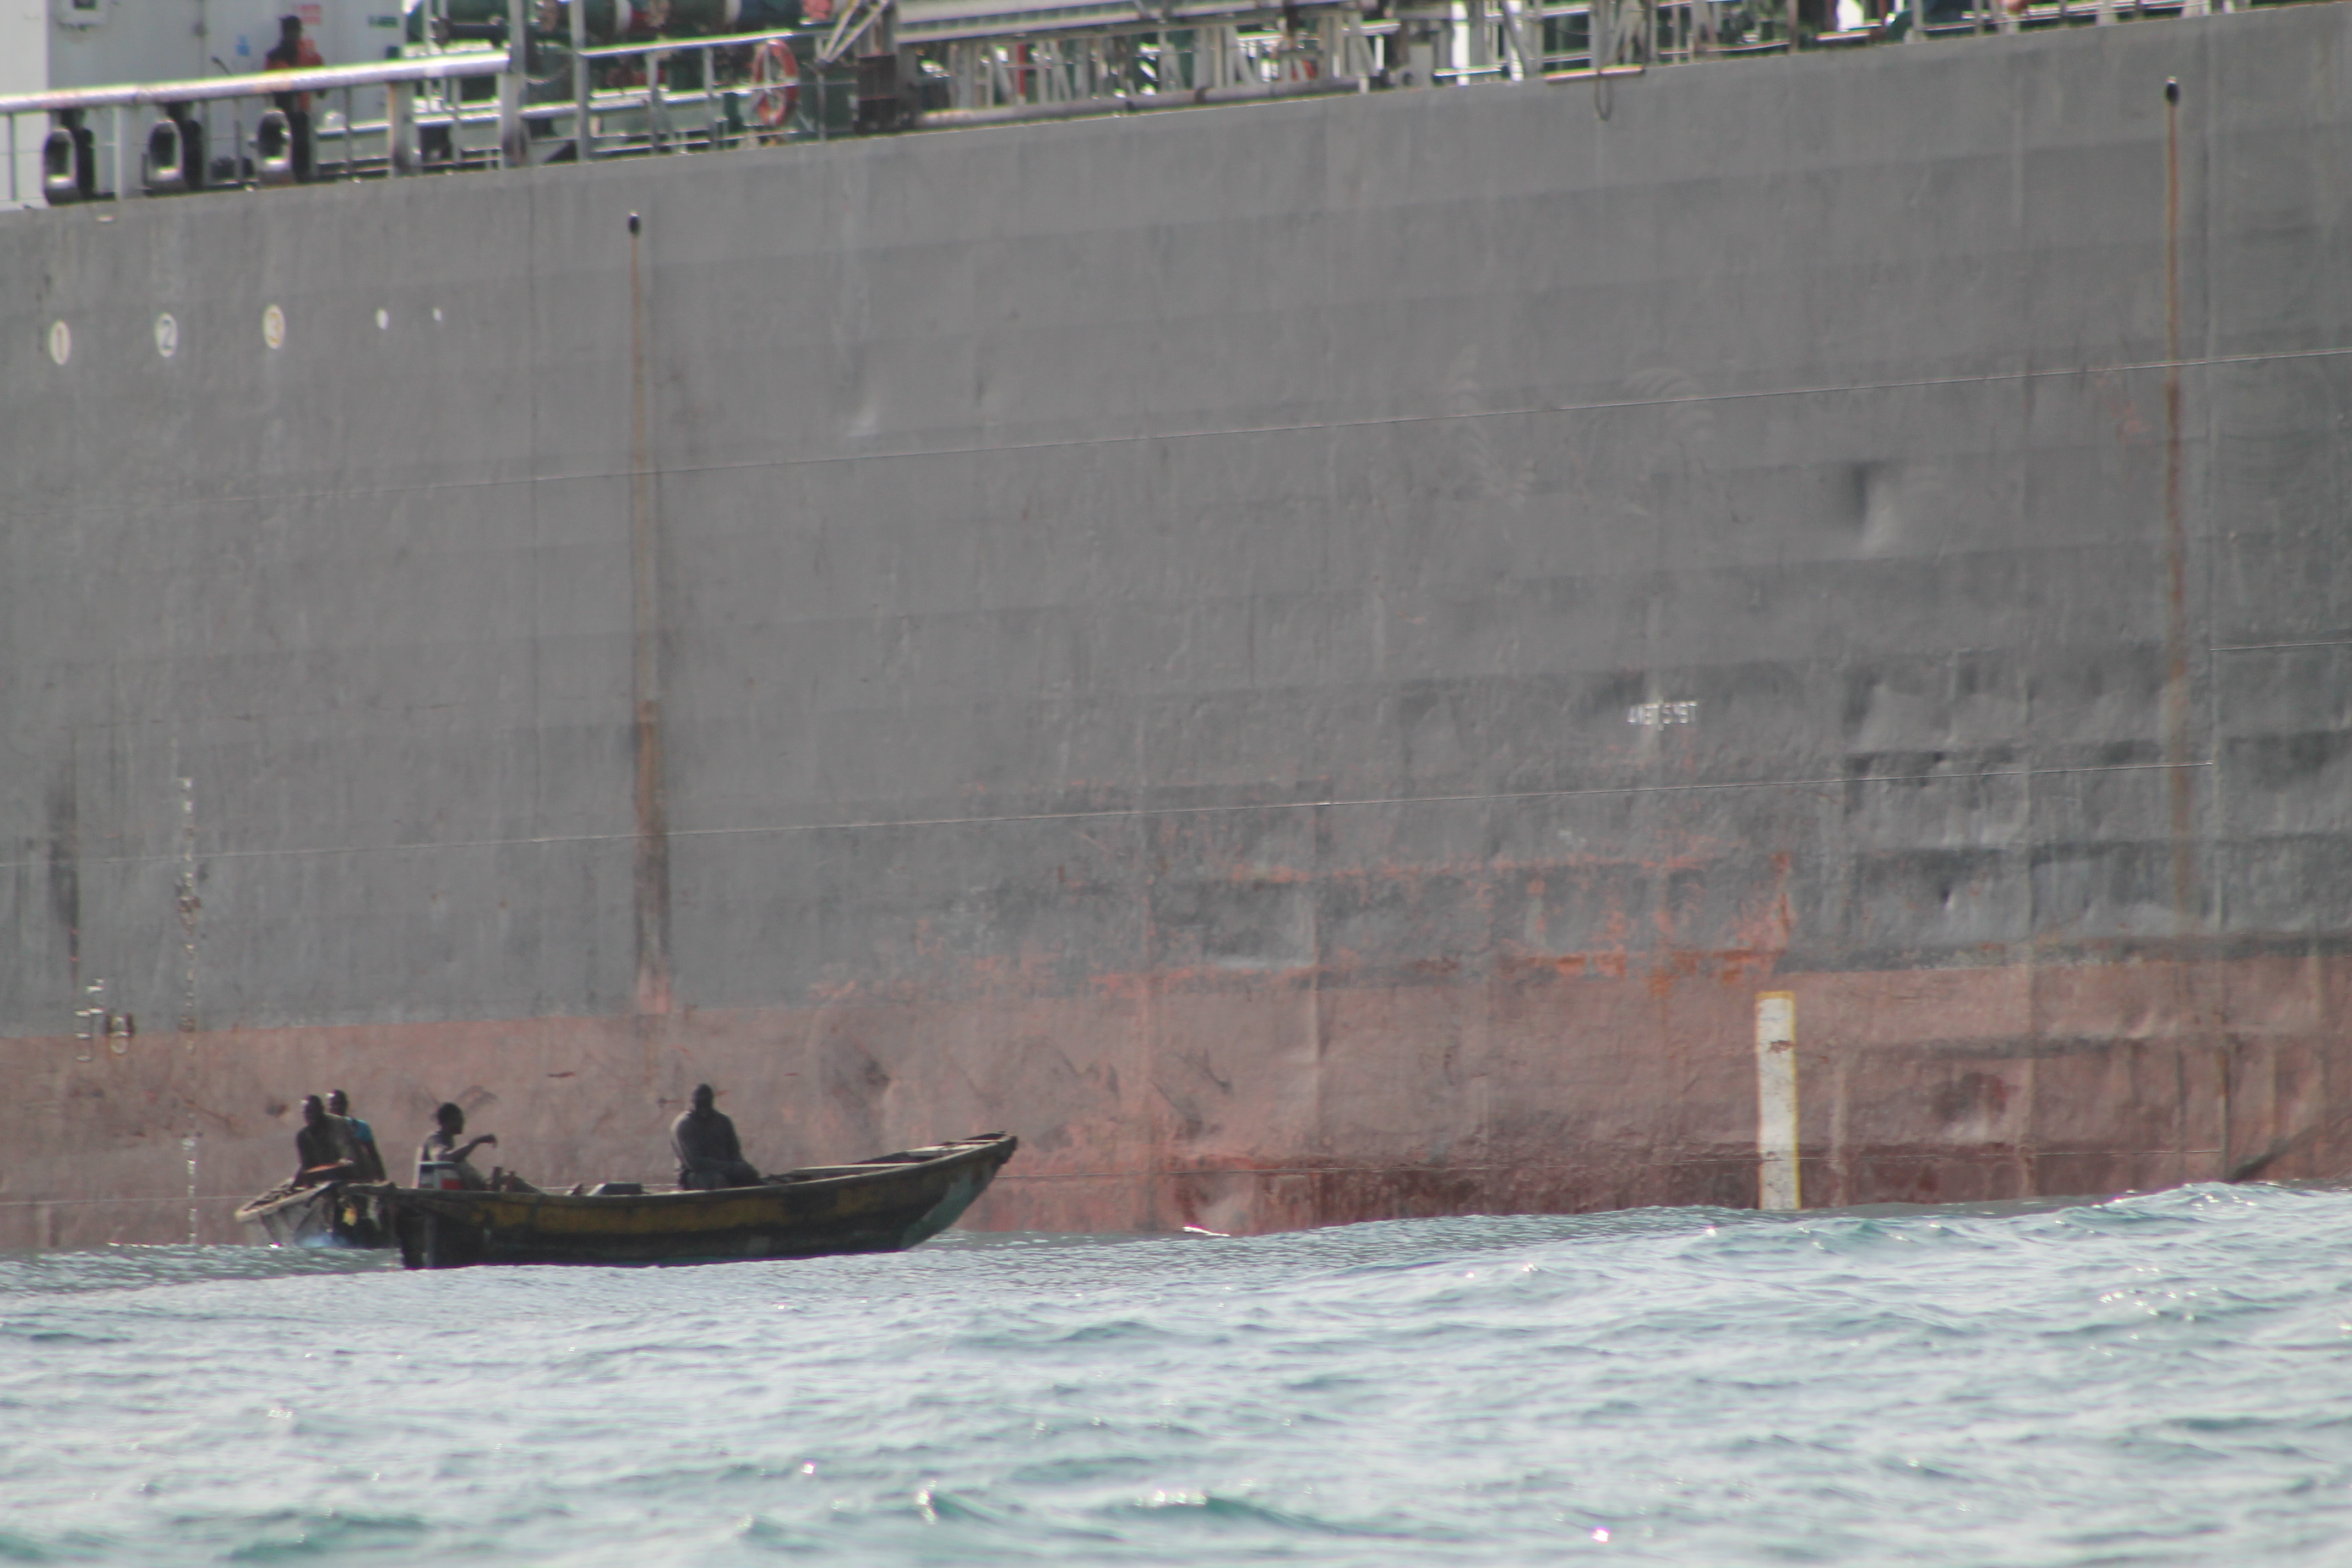 Close proximity of small boats, like this one on Lagos roads, often creates anxiety amongst ships’ crews and generates false piracy alerts. Photo by Dirk Steffen